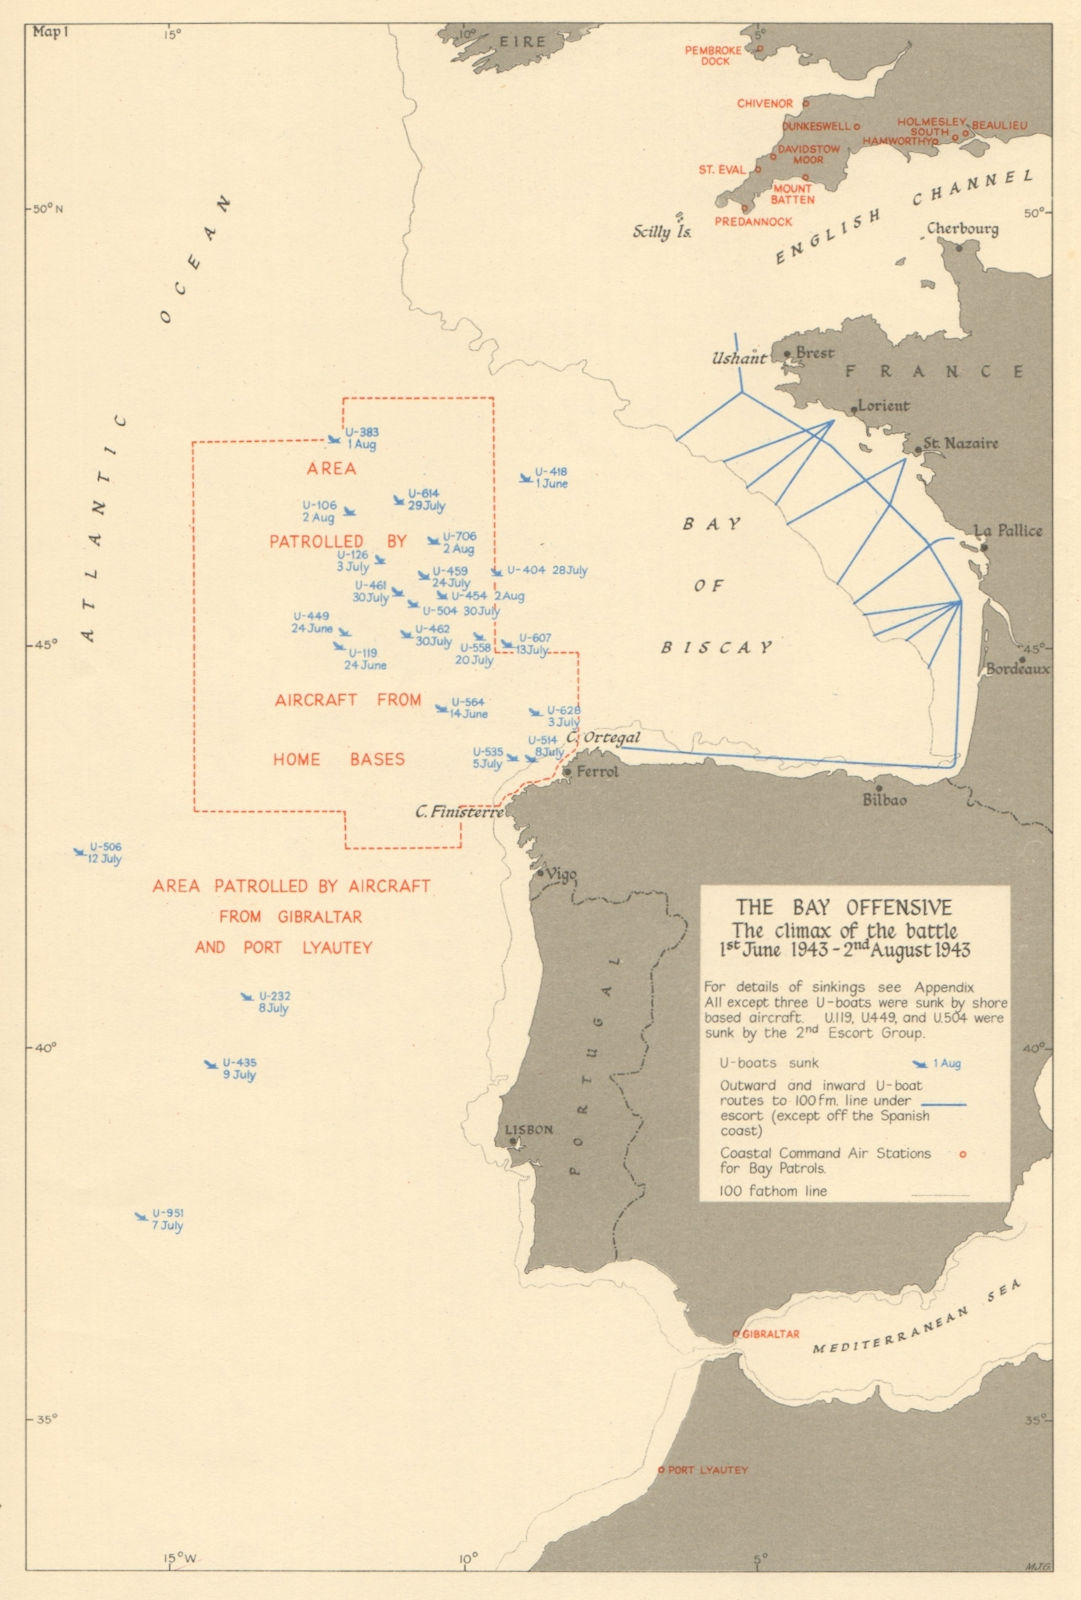 Bay of Biscay. U-Boat sinkings. Battle of the Atlantic June-July 1943 1954 map